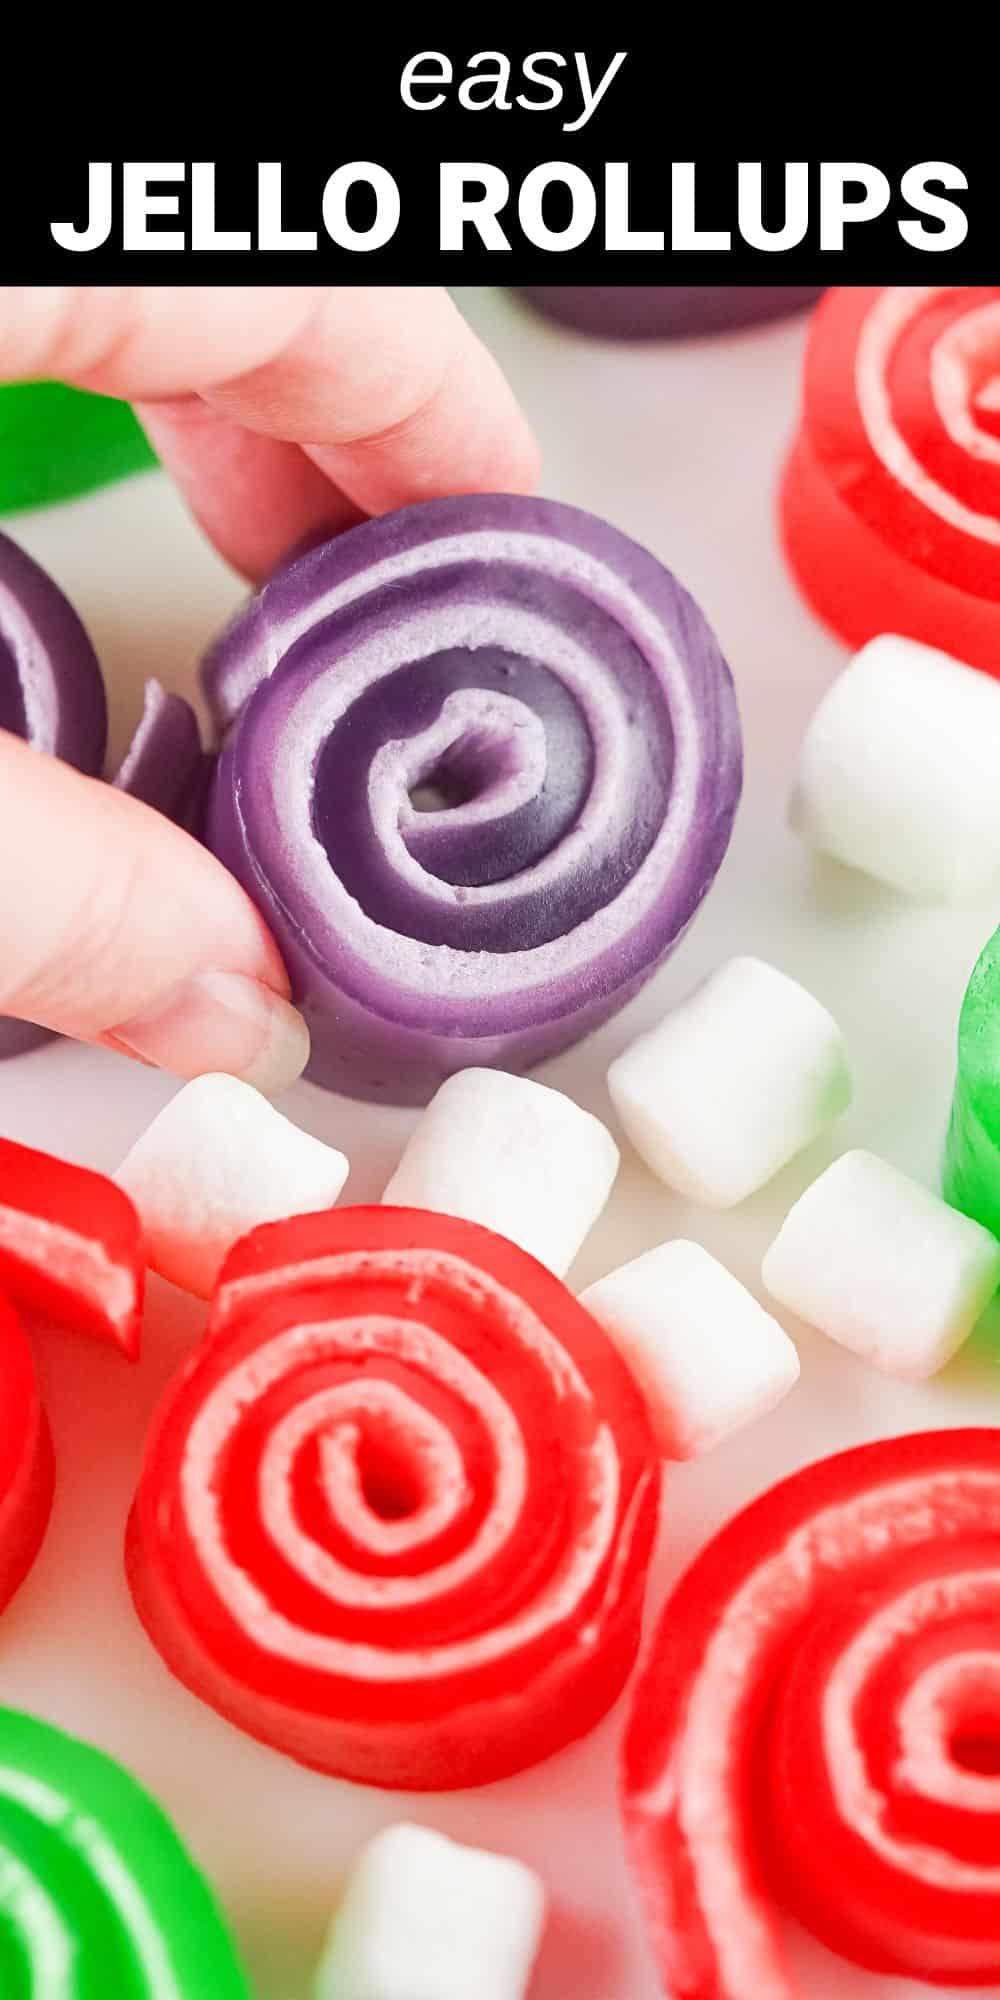 These colorful marshmallow Jello rollups are a fun new snack that the kids will love. With just three ingredients, these no-bake rollups are super quick and easy to whip up any time you need a fun treat for the little ones.